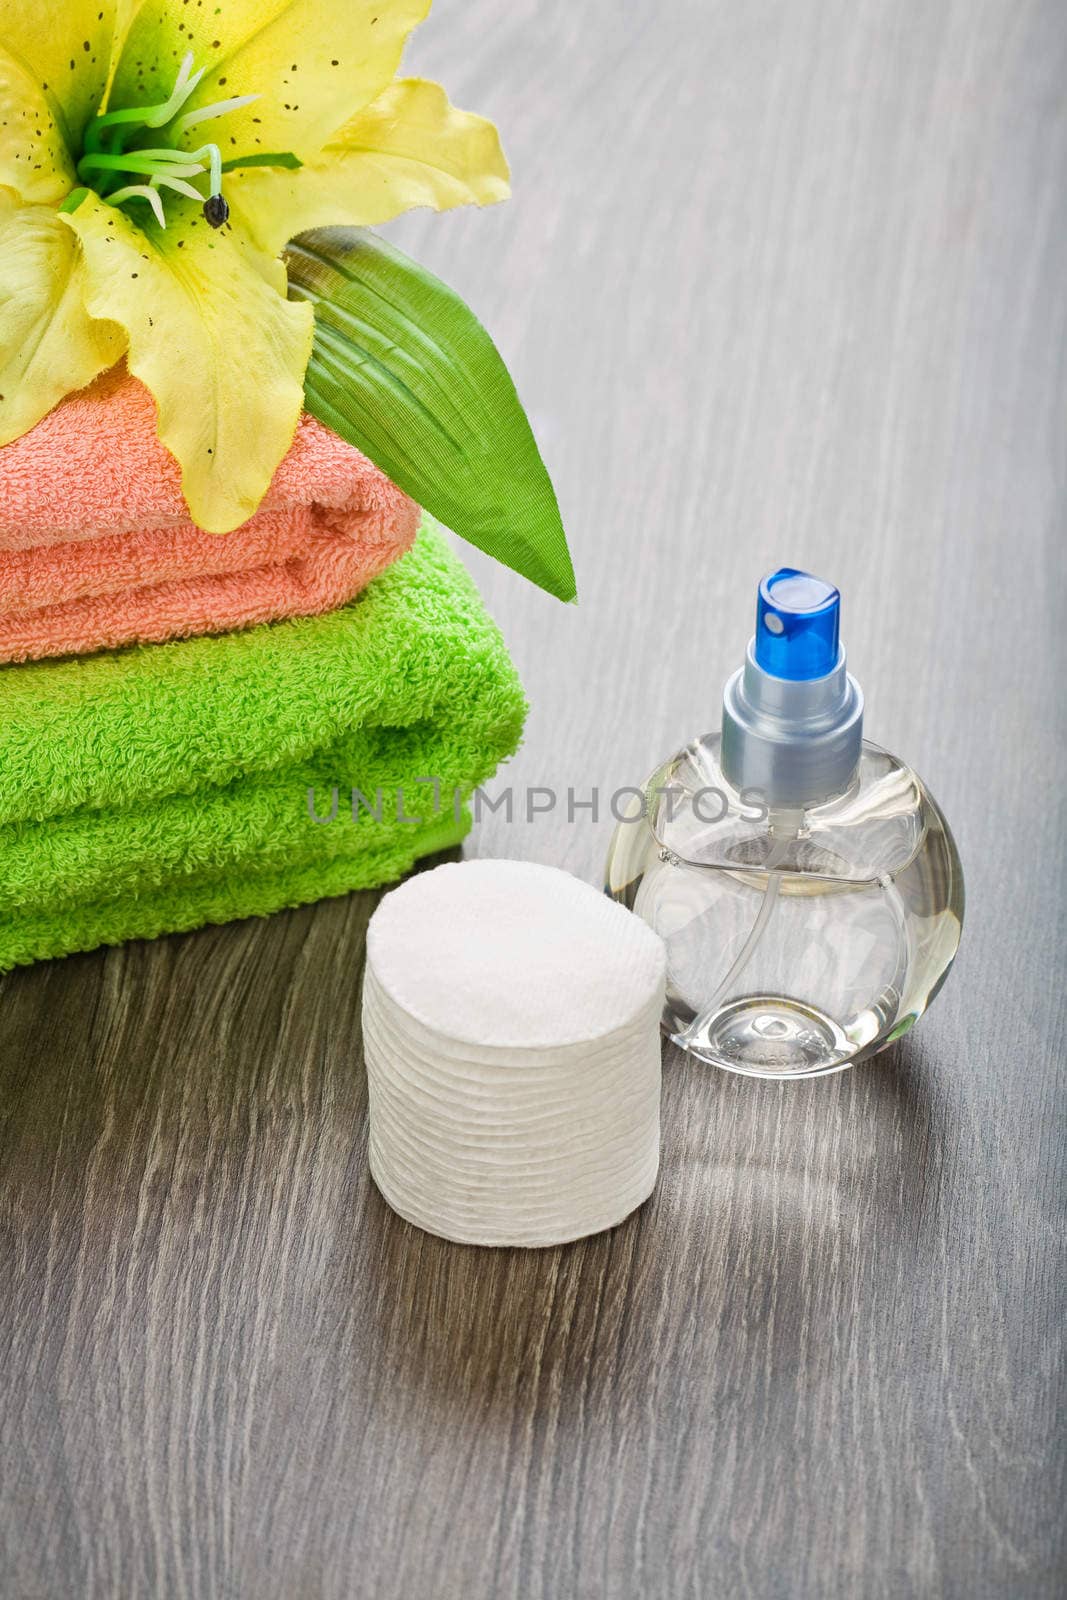 bottle towels flower and cotton pads on wooden background